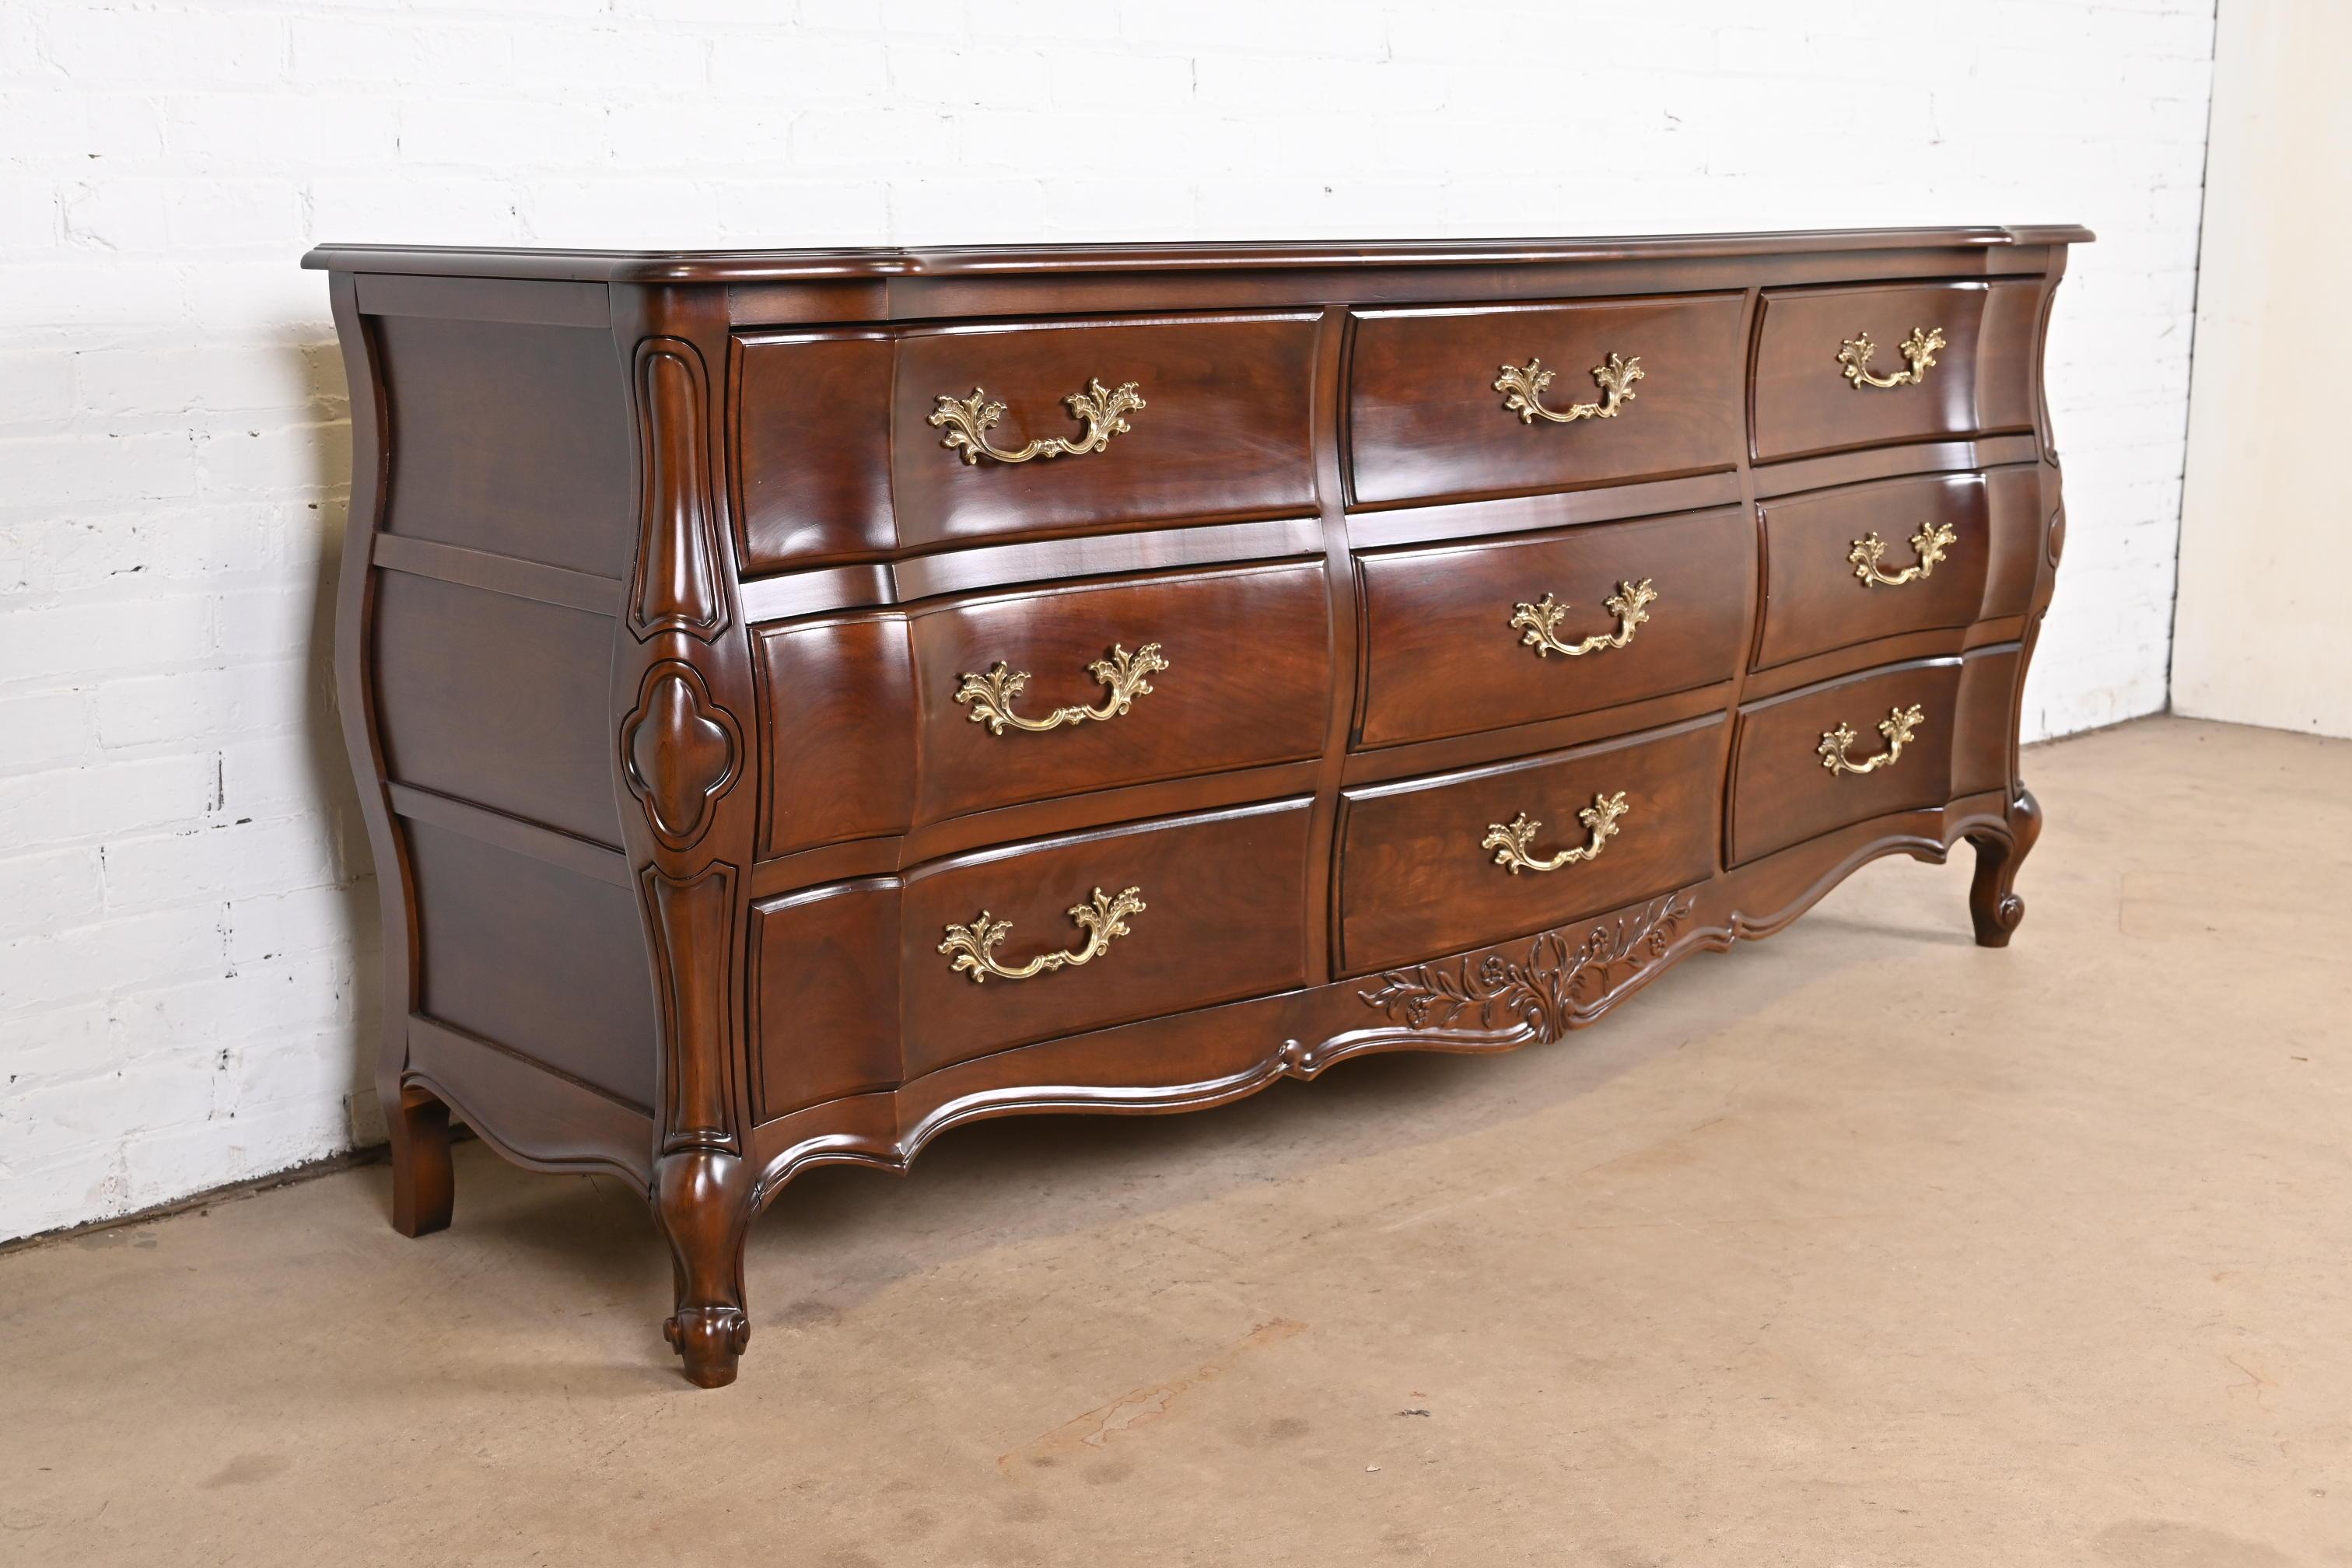 Brass French Provincial Louis XV Cherry Wood Dresser by White Furniture, Refinished For Sale